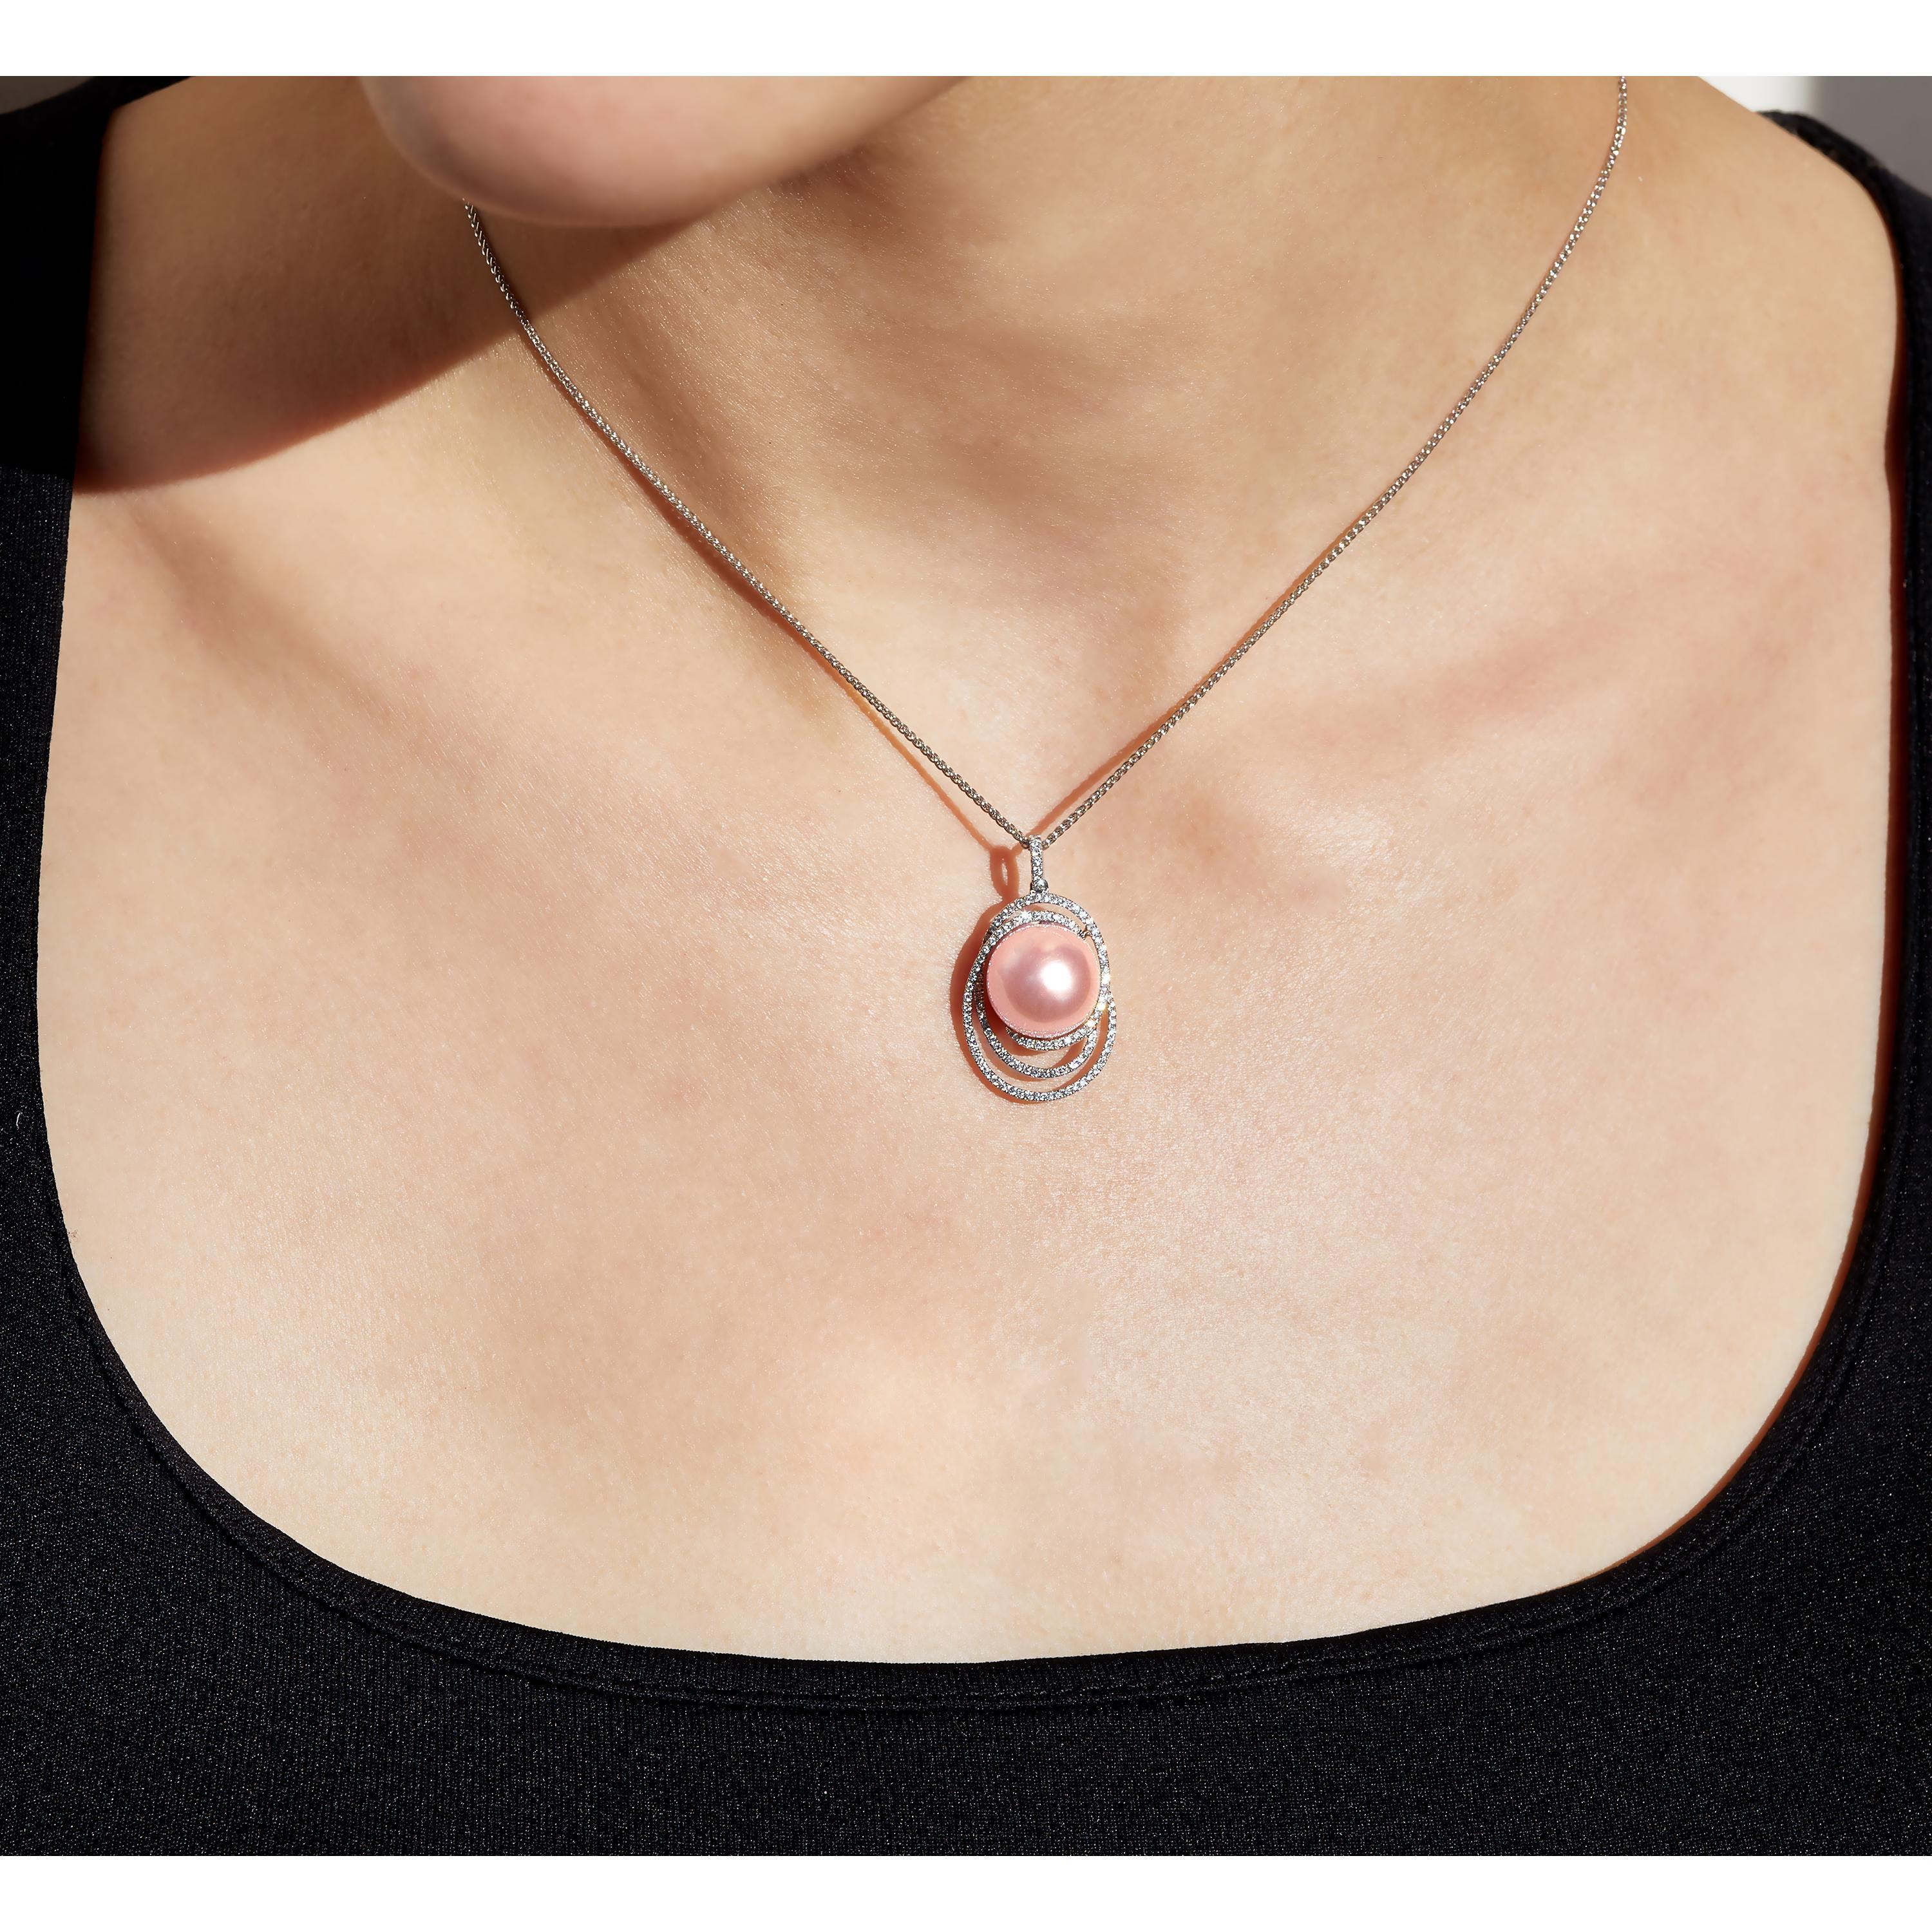 This elegant pendant by Yoko London features a natural pink Freshwater pearl surrounded by delicate diamond rows. Masterfully crafted in 18 Karat white gold in our London atelier, this pendant has been completed to the highest standard. Perfect to